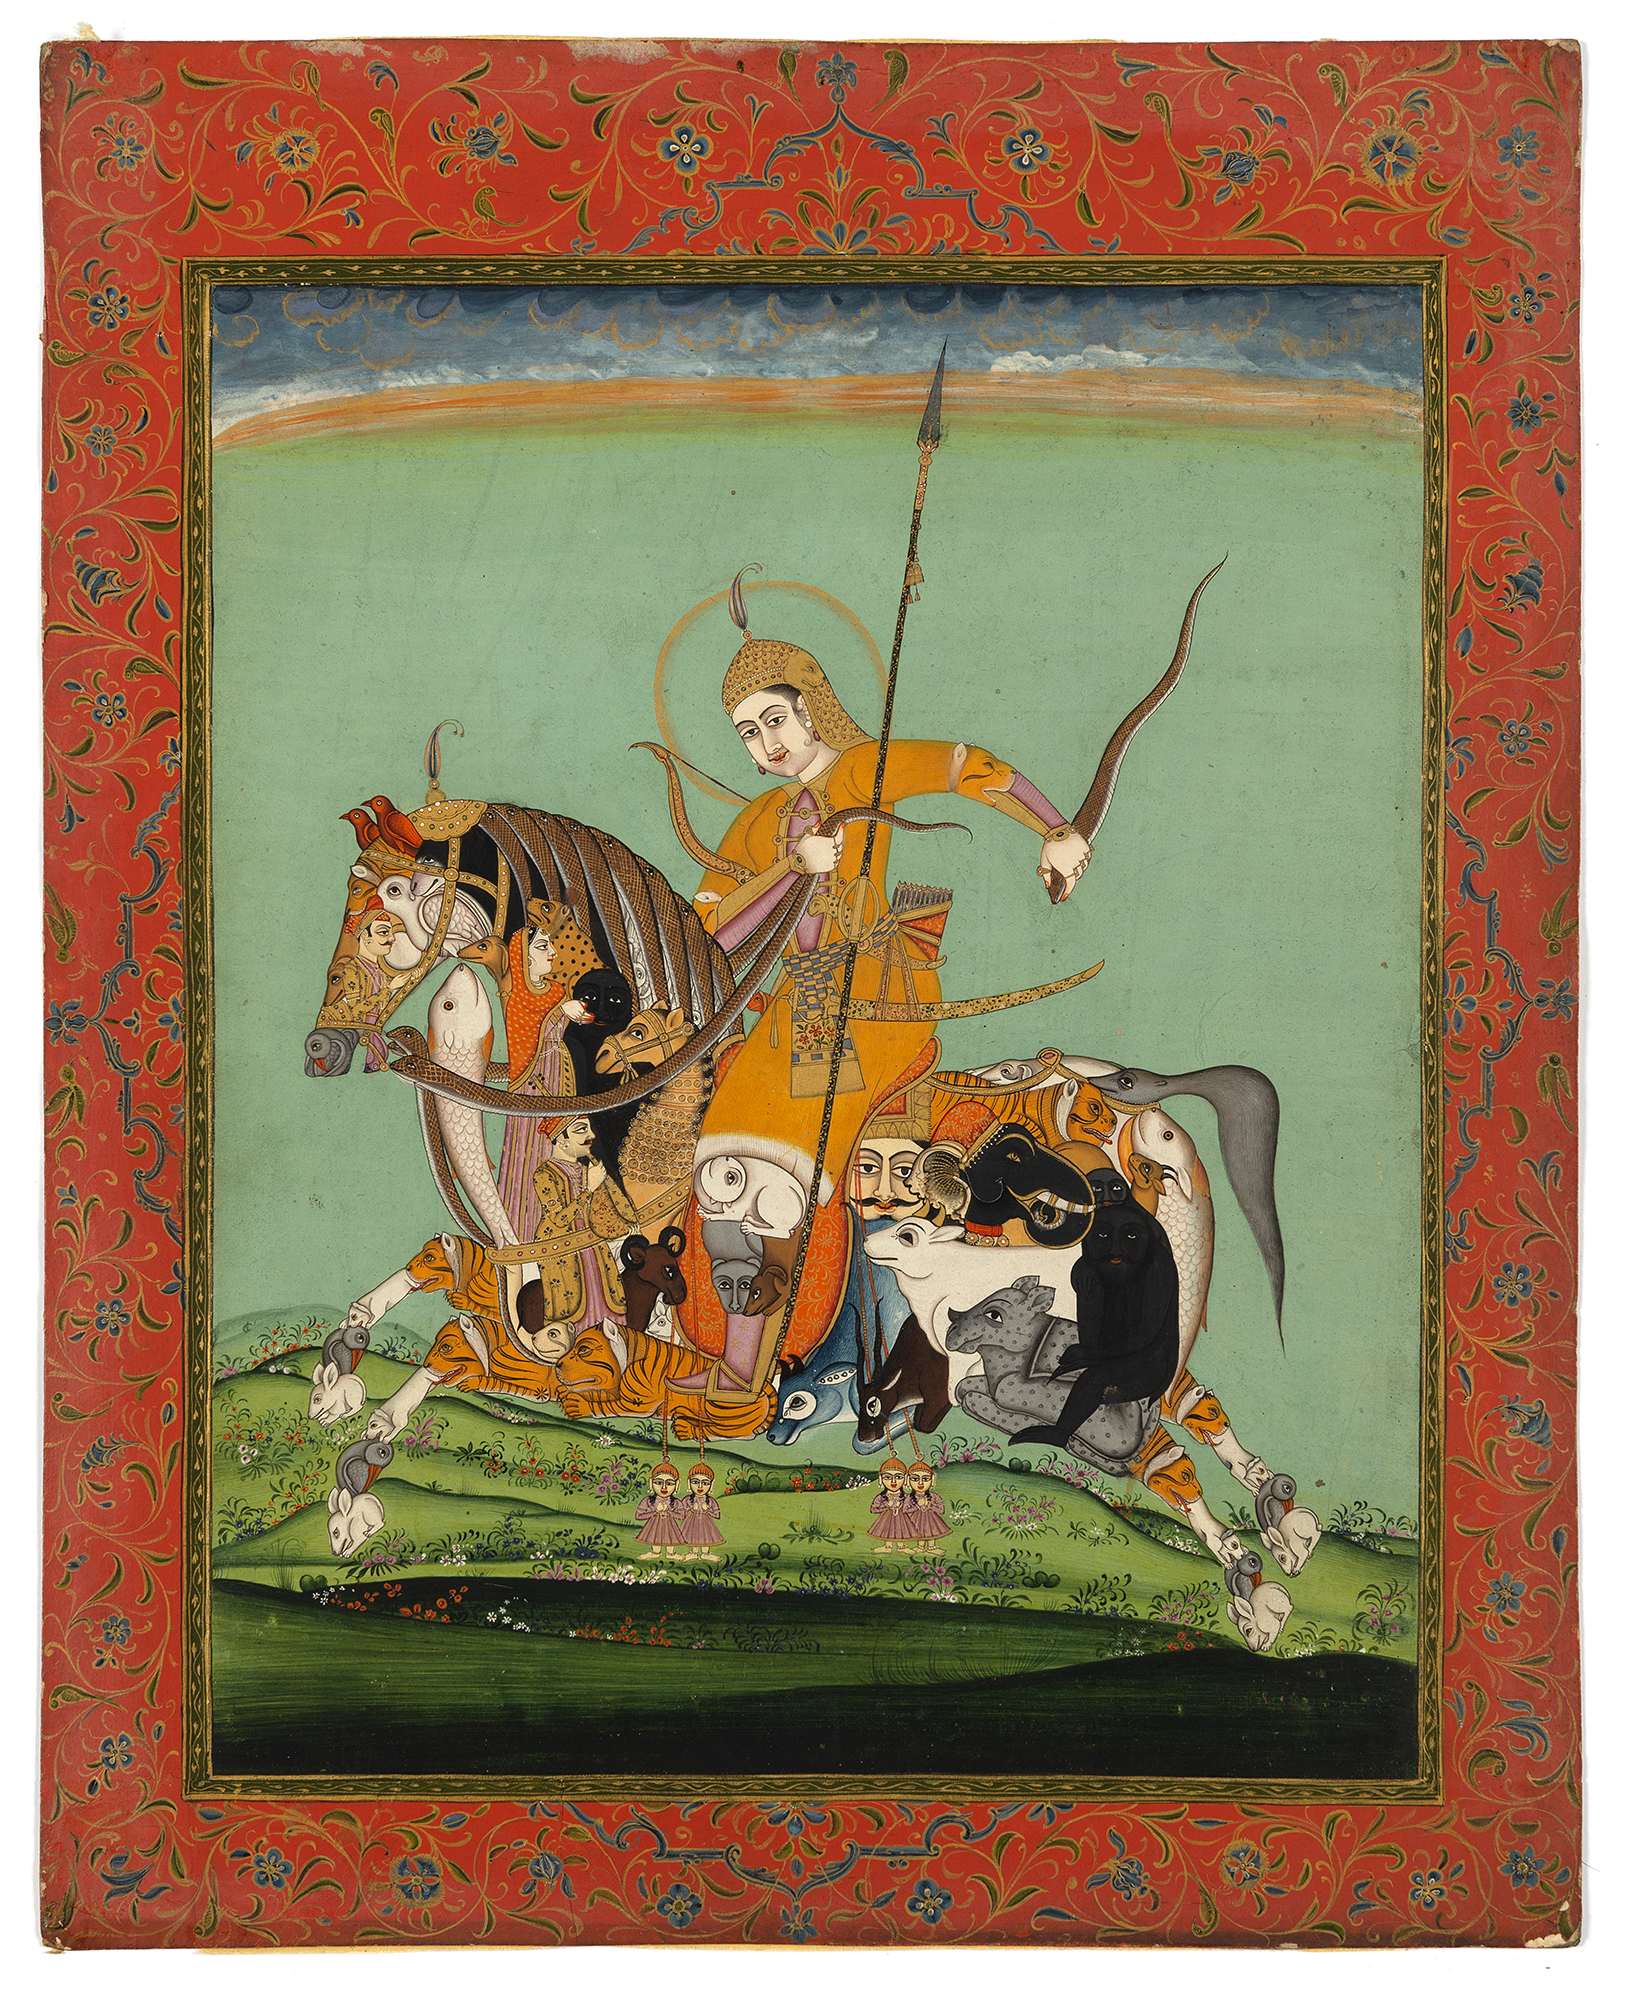 Painting of a warrior-looking figure riding a horse comprised of other human and animal figures